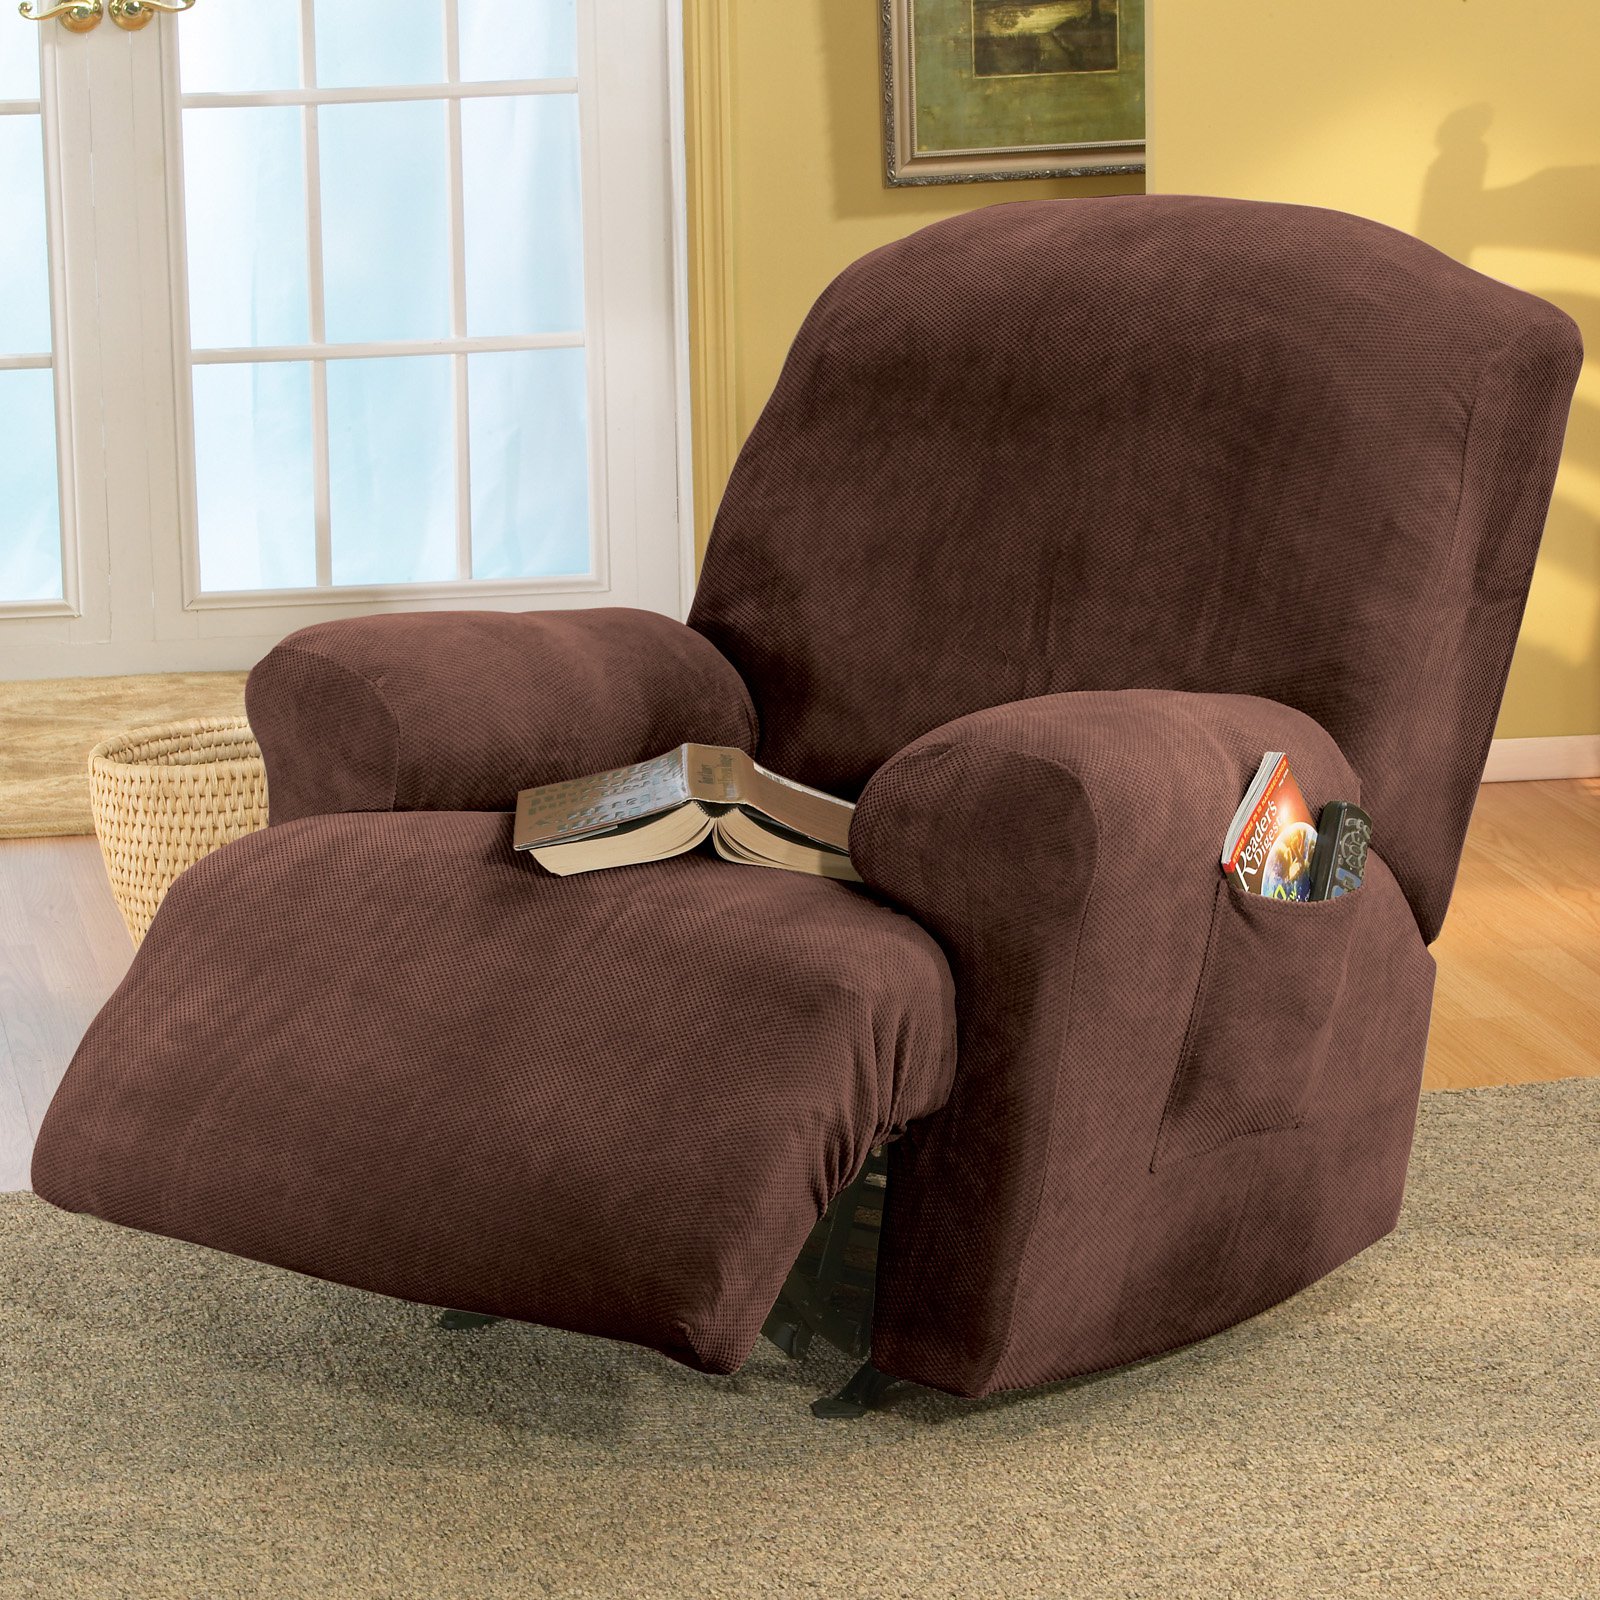 SureFit  Stretch Pique Lift Recliner Slipcover Chocolate - image 1 of 2